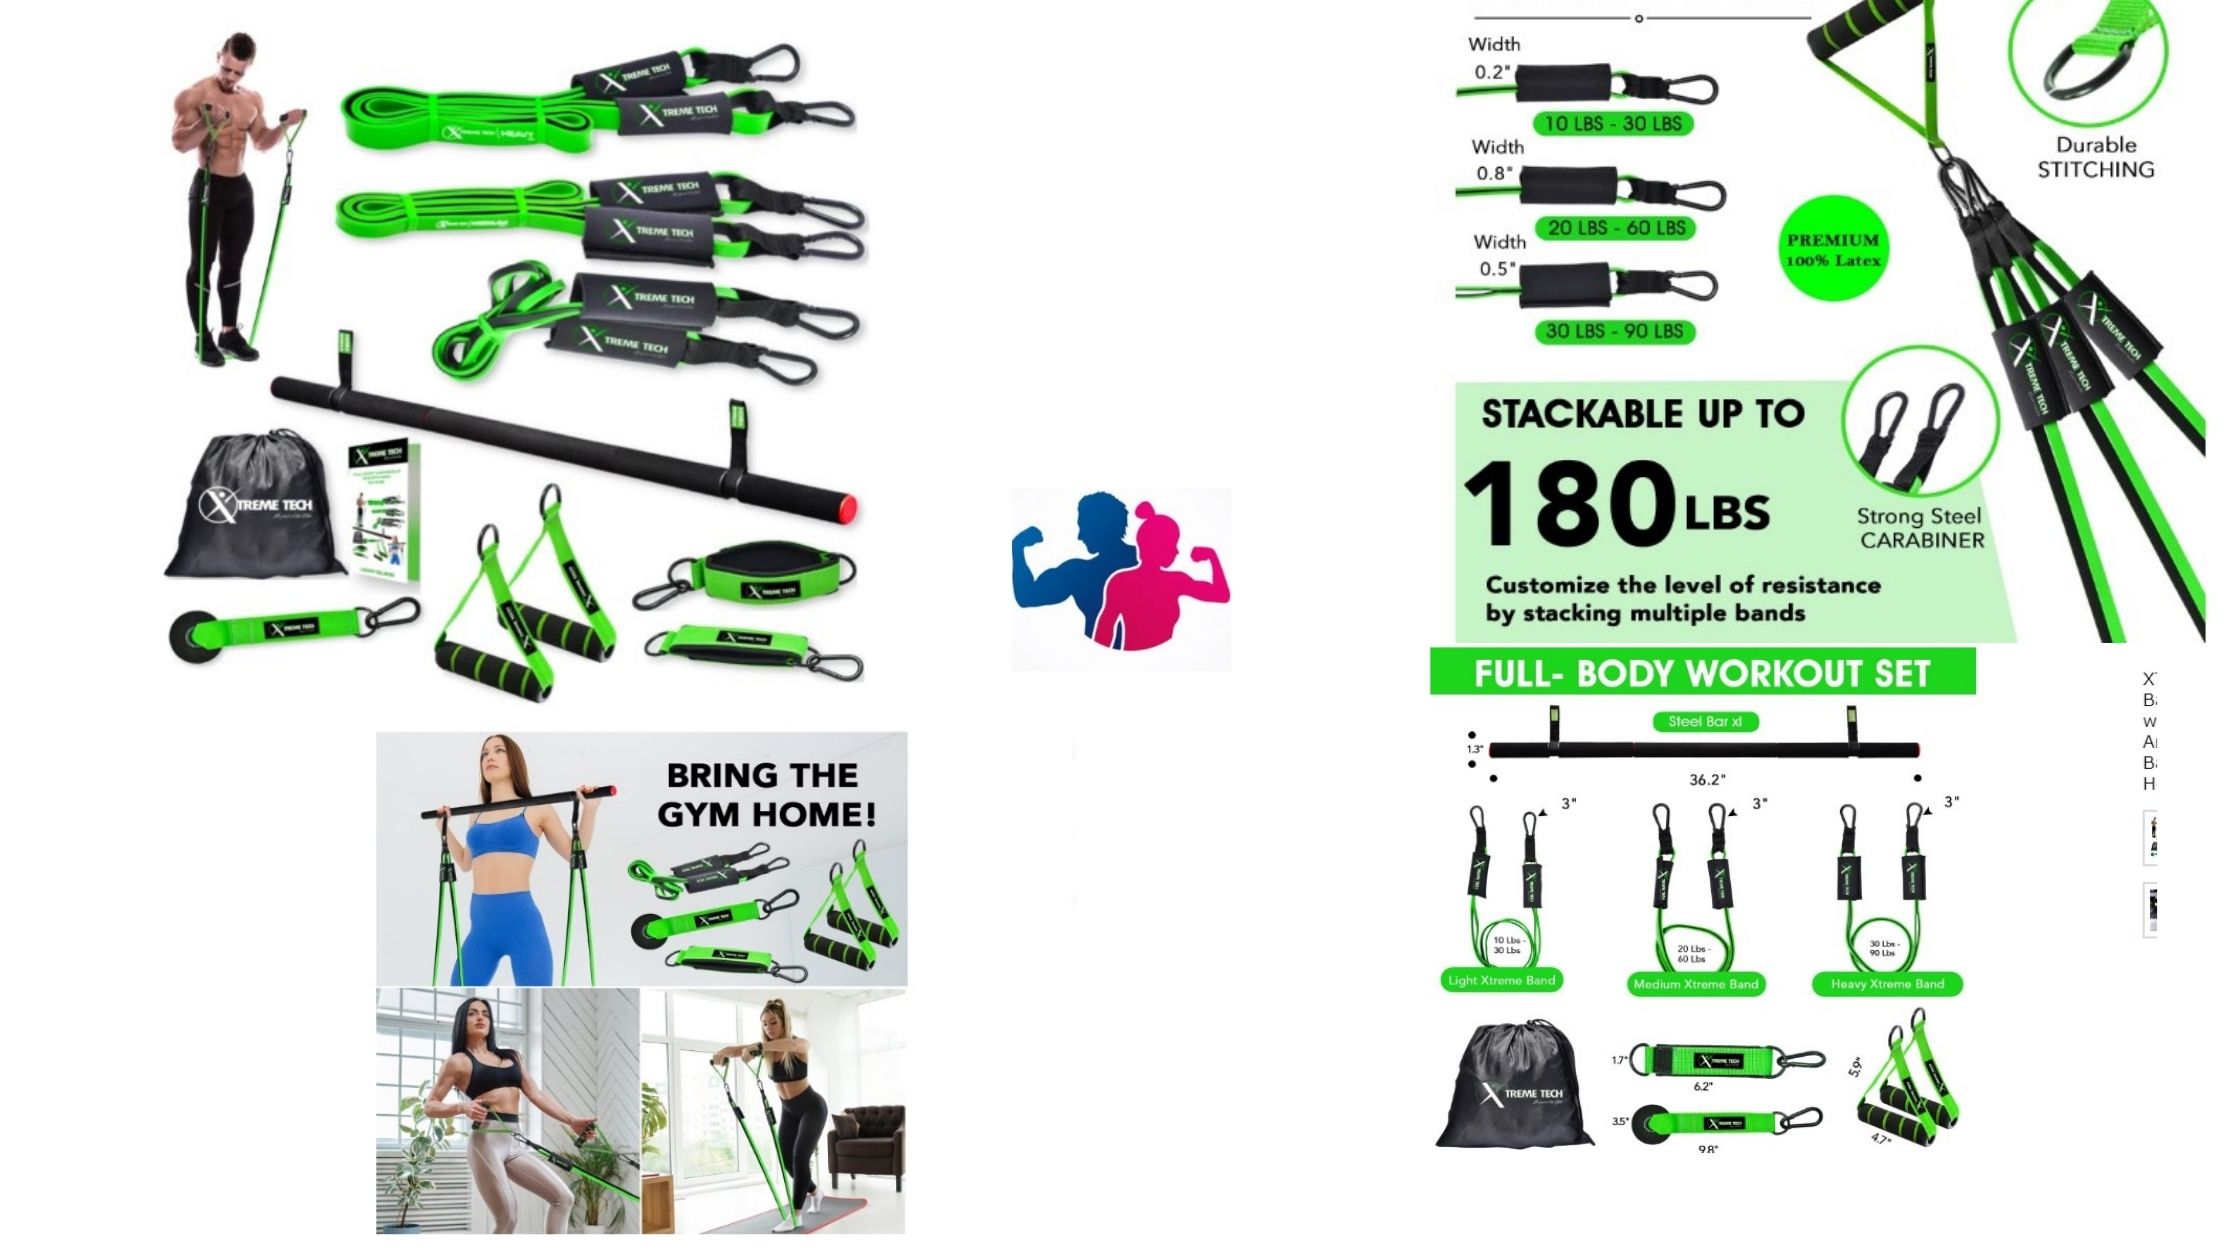 XTREME TECH Resistance Bands Set | Workout Bands Kit with Bar, Handles, Door Anchor, Ankle Straps, Carry Bag, Insert | Upto 180LBS for Heavy Exercise | Home Gym | Fitness Equipment for Men & Women